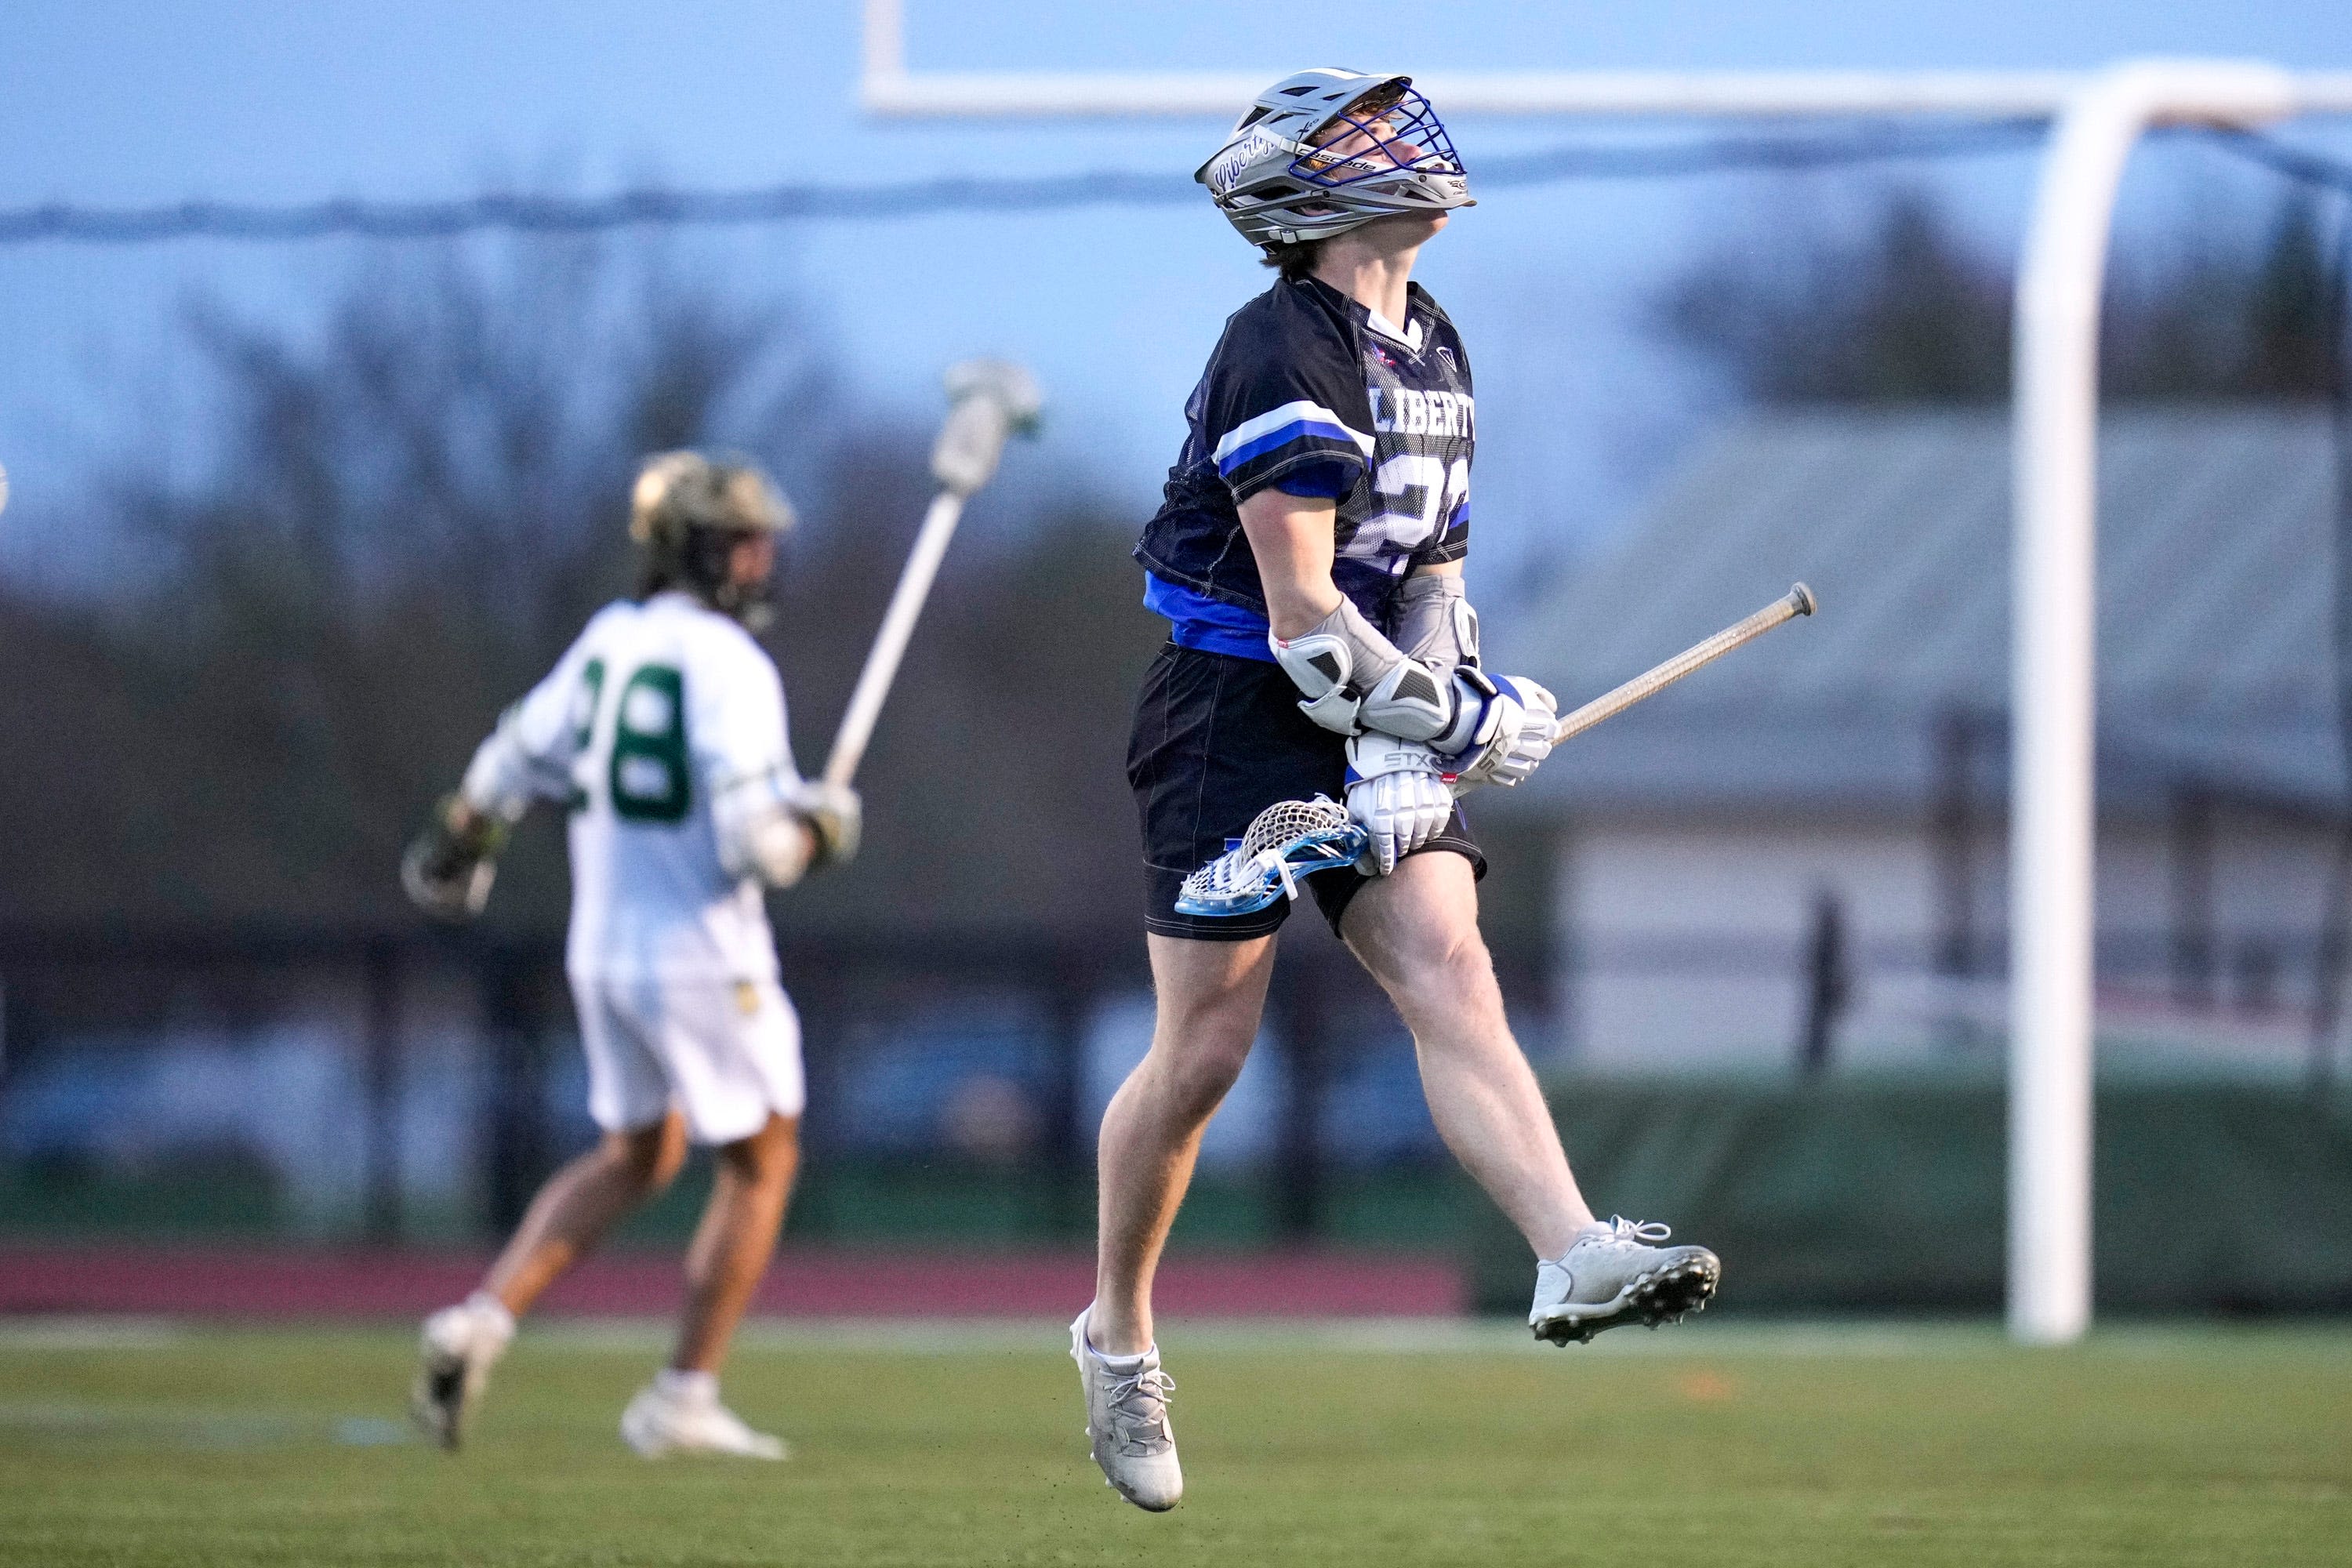 Vote for the Greater Columbus high school boys lacrosse regular season player of the year